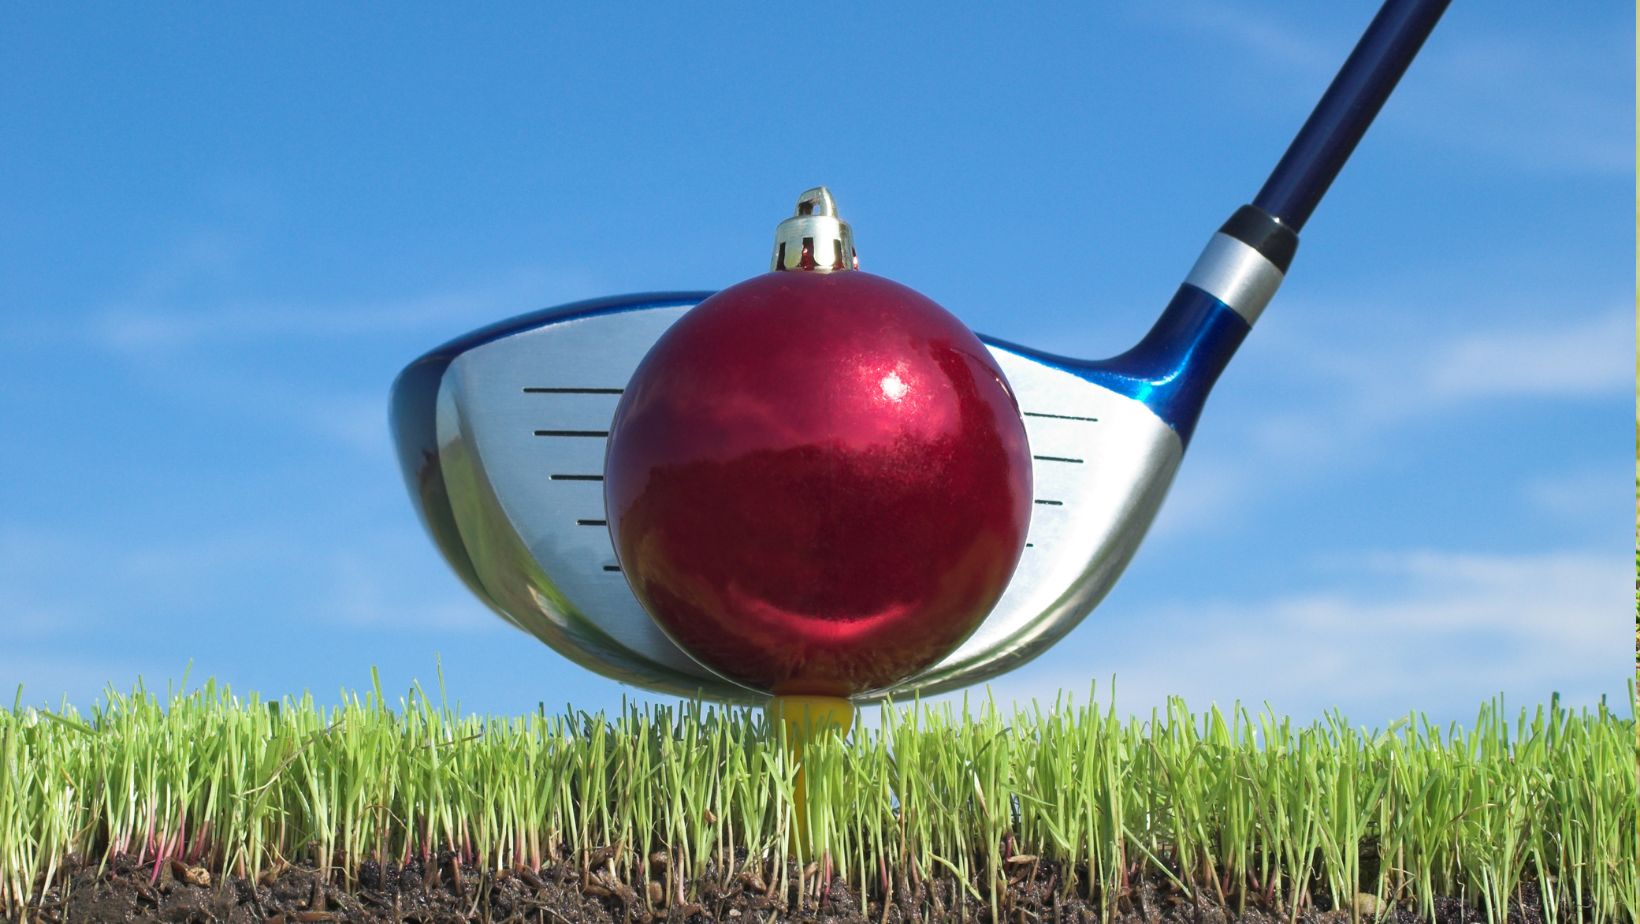 Choosing the Perfect Putting Green Gift